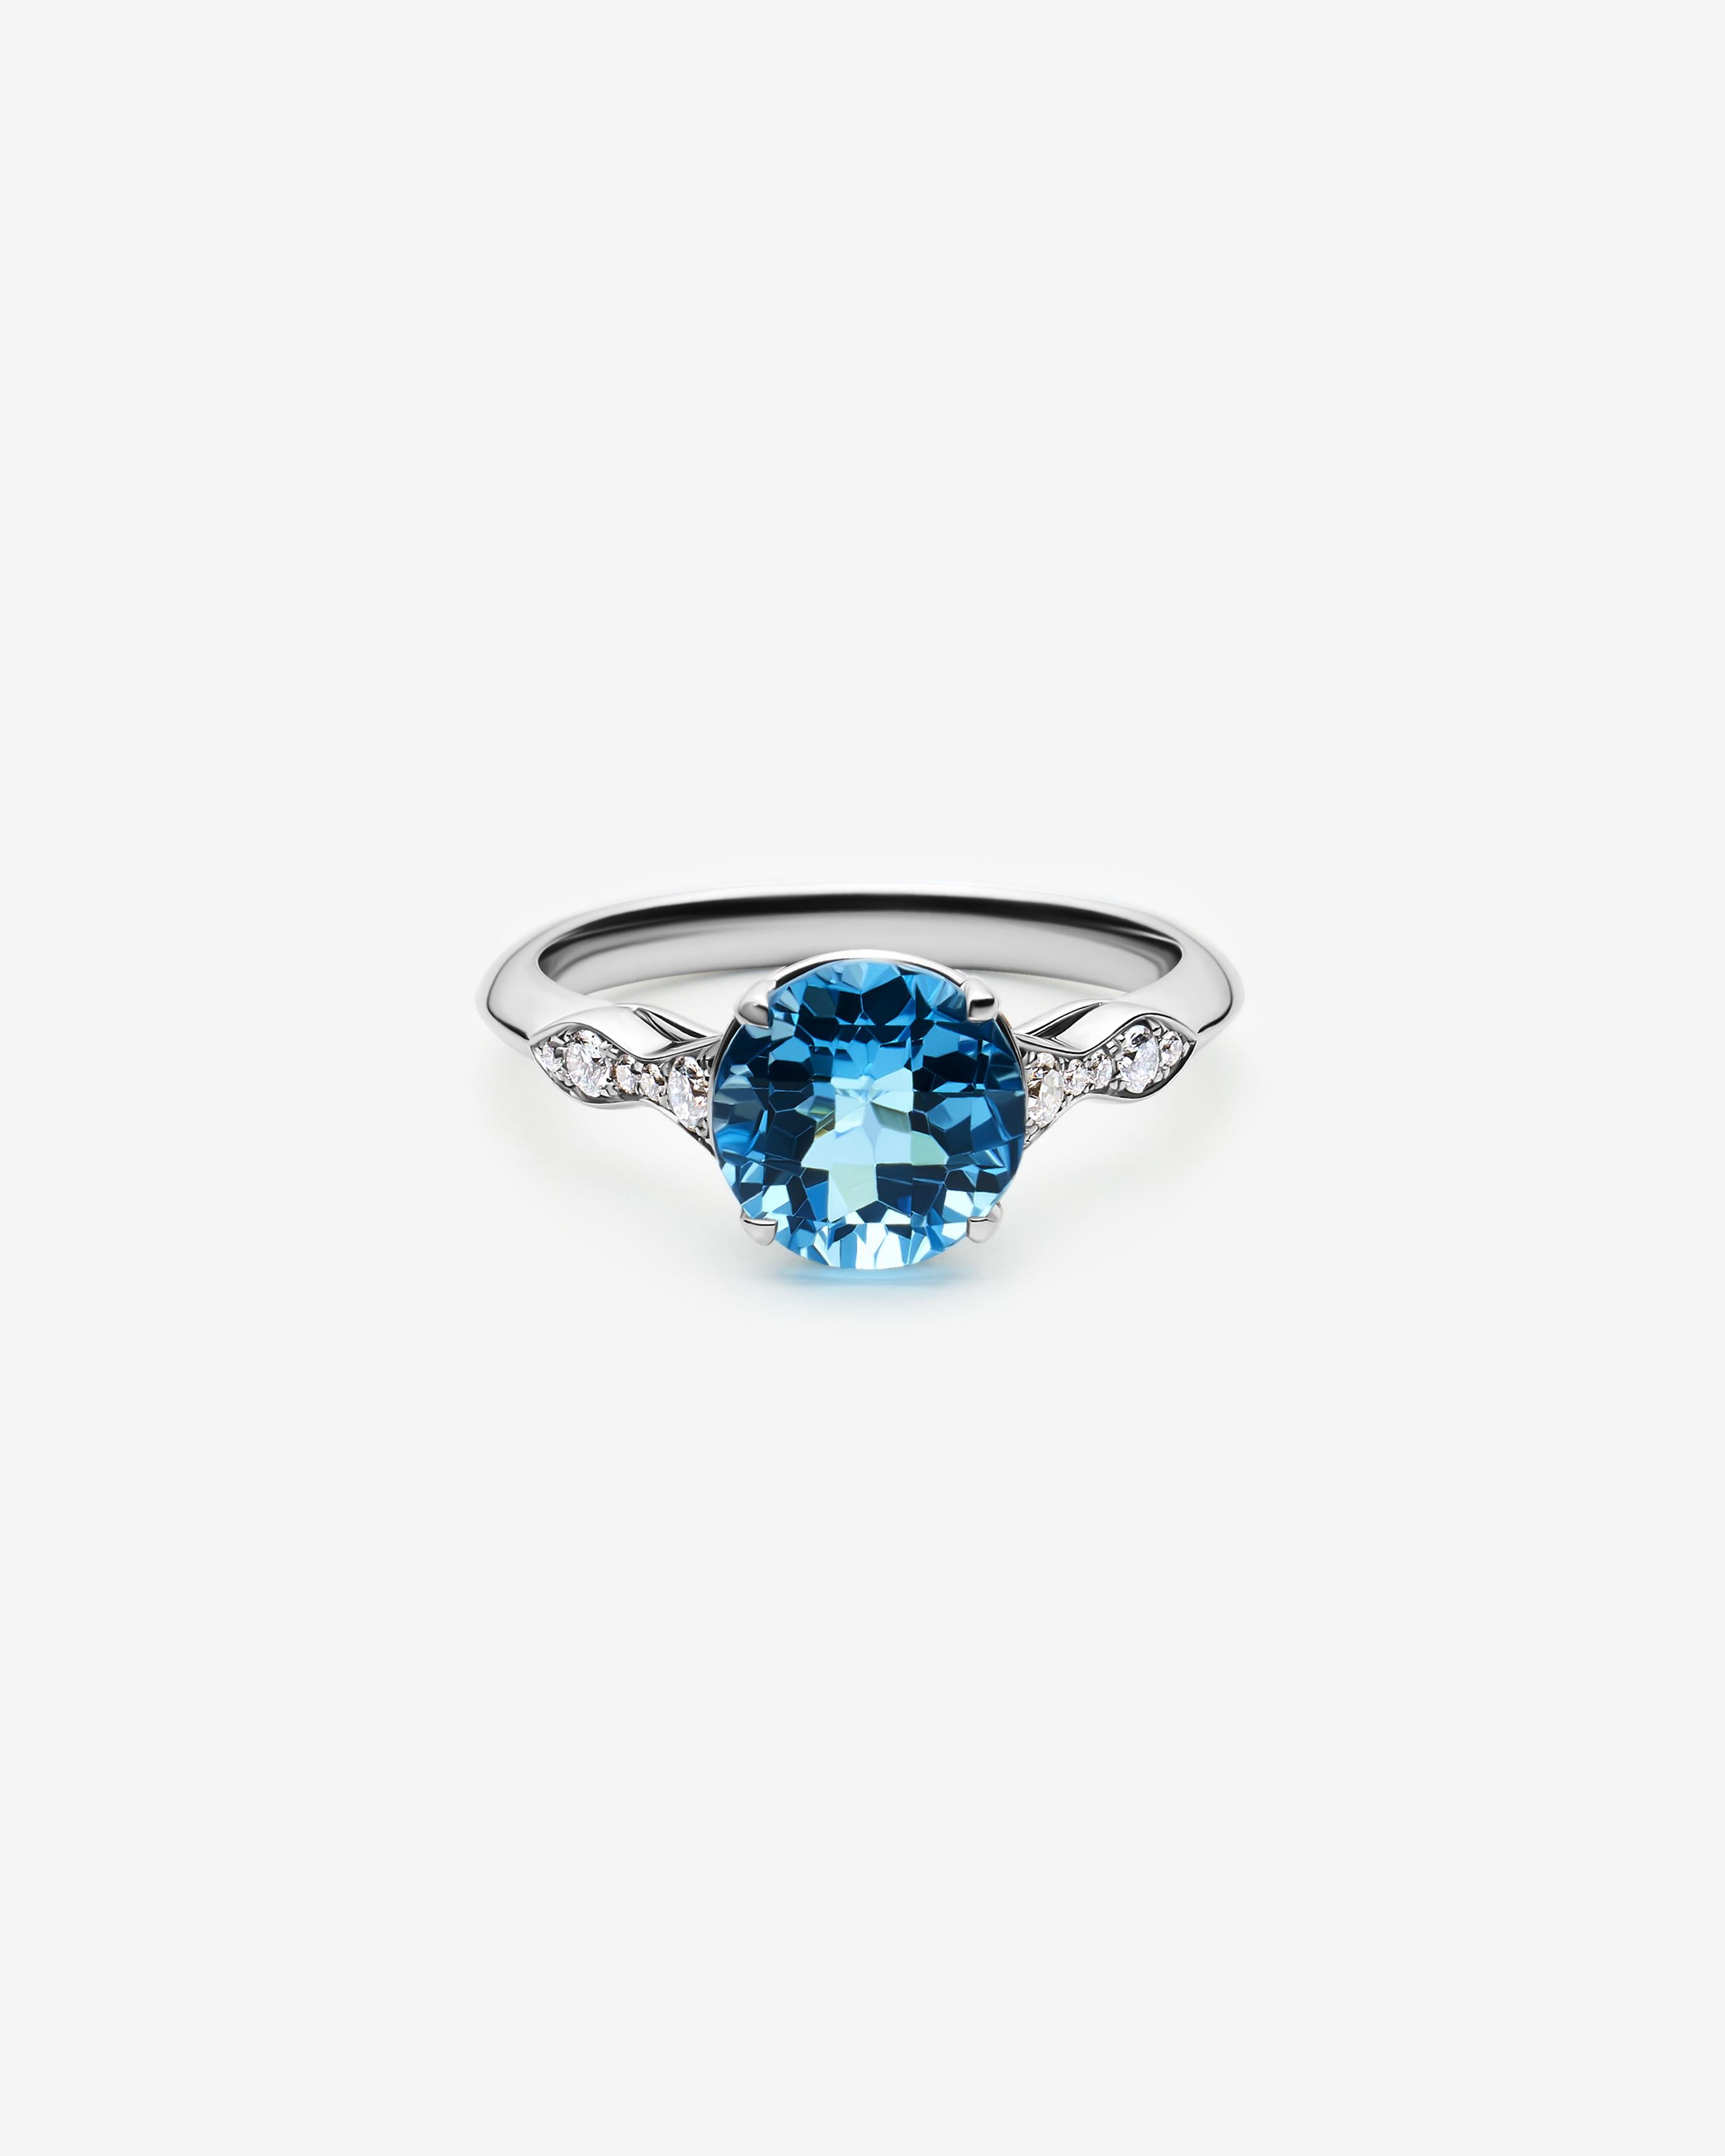 For Sale:  14k White Gold Diamond Engagement Ring with 2.36 Carat Round Blue Topaz 2